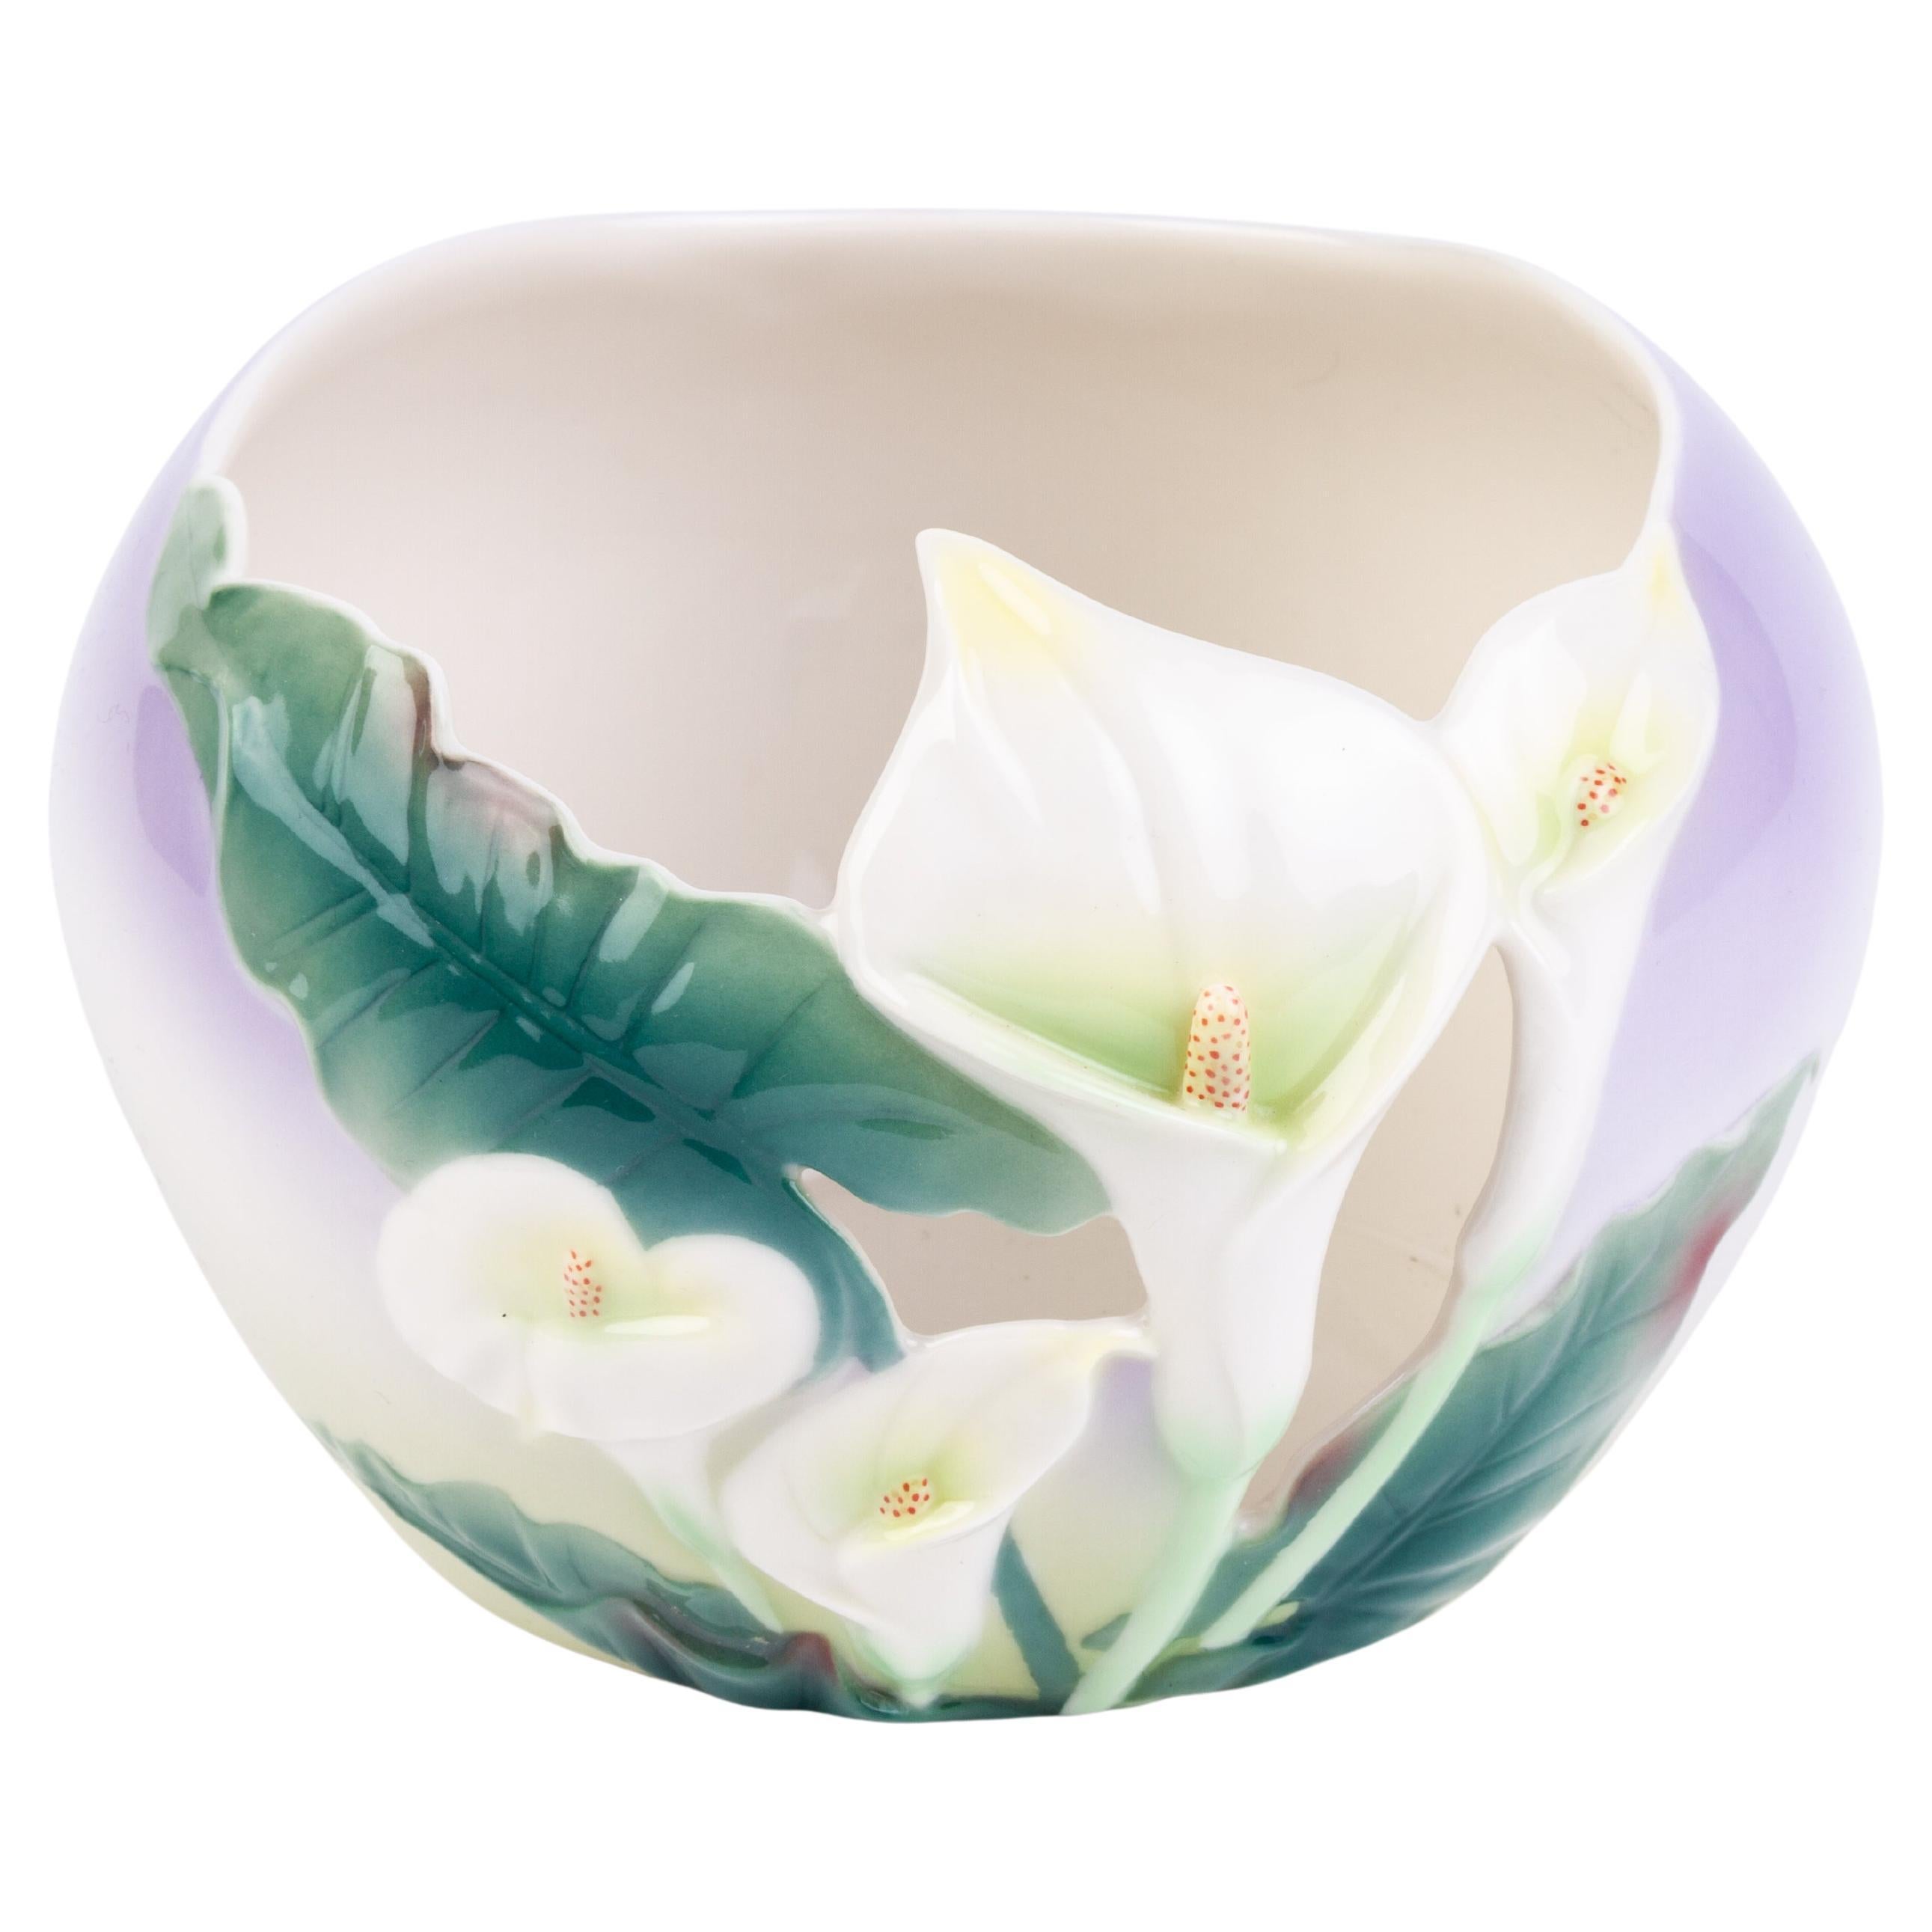 Signed Franz Porcelain Floral Vase Bowl Designed by May Wei Xuet-Mei